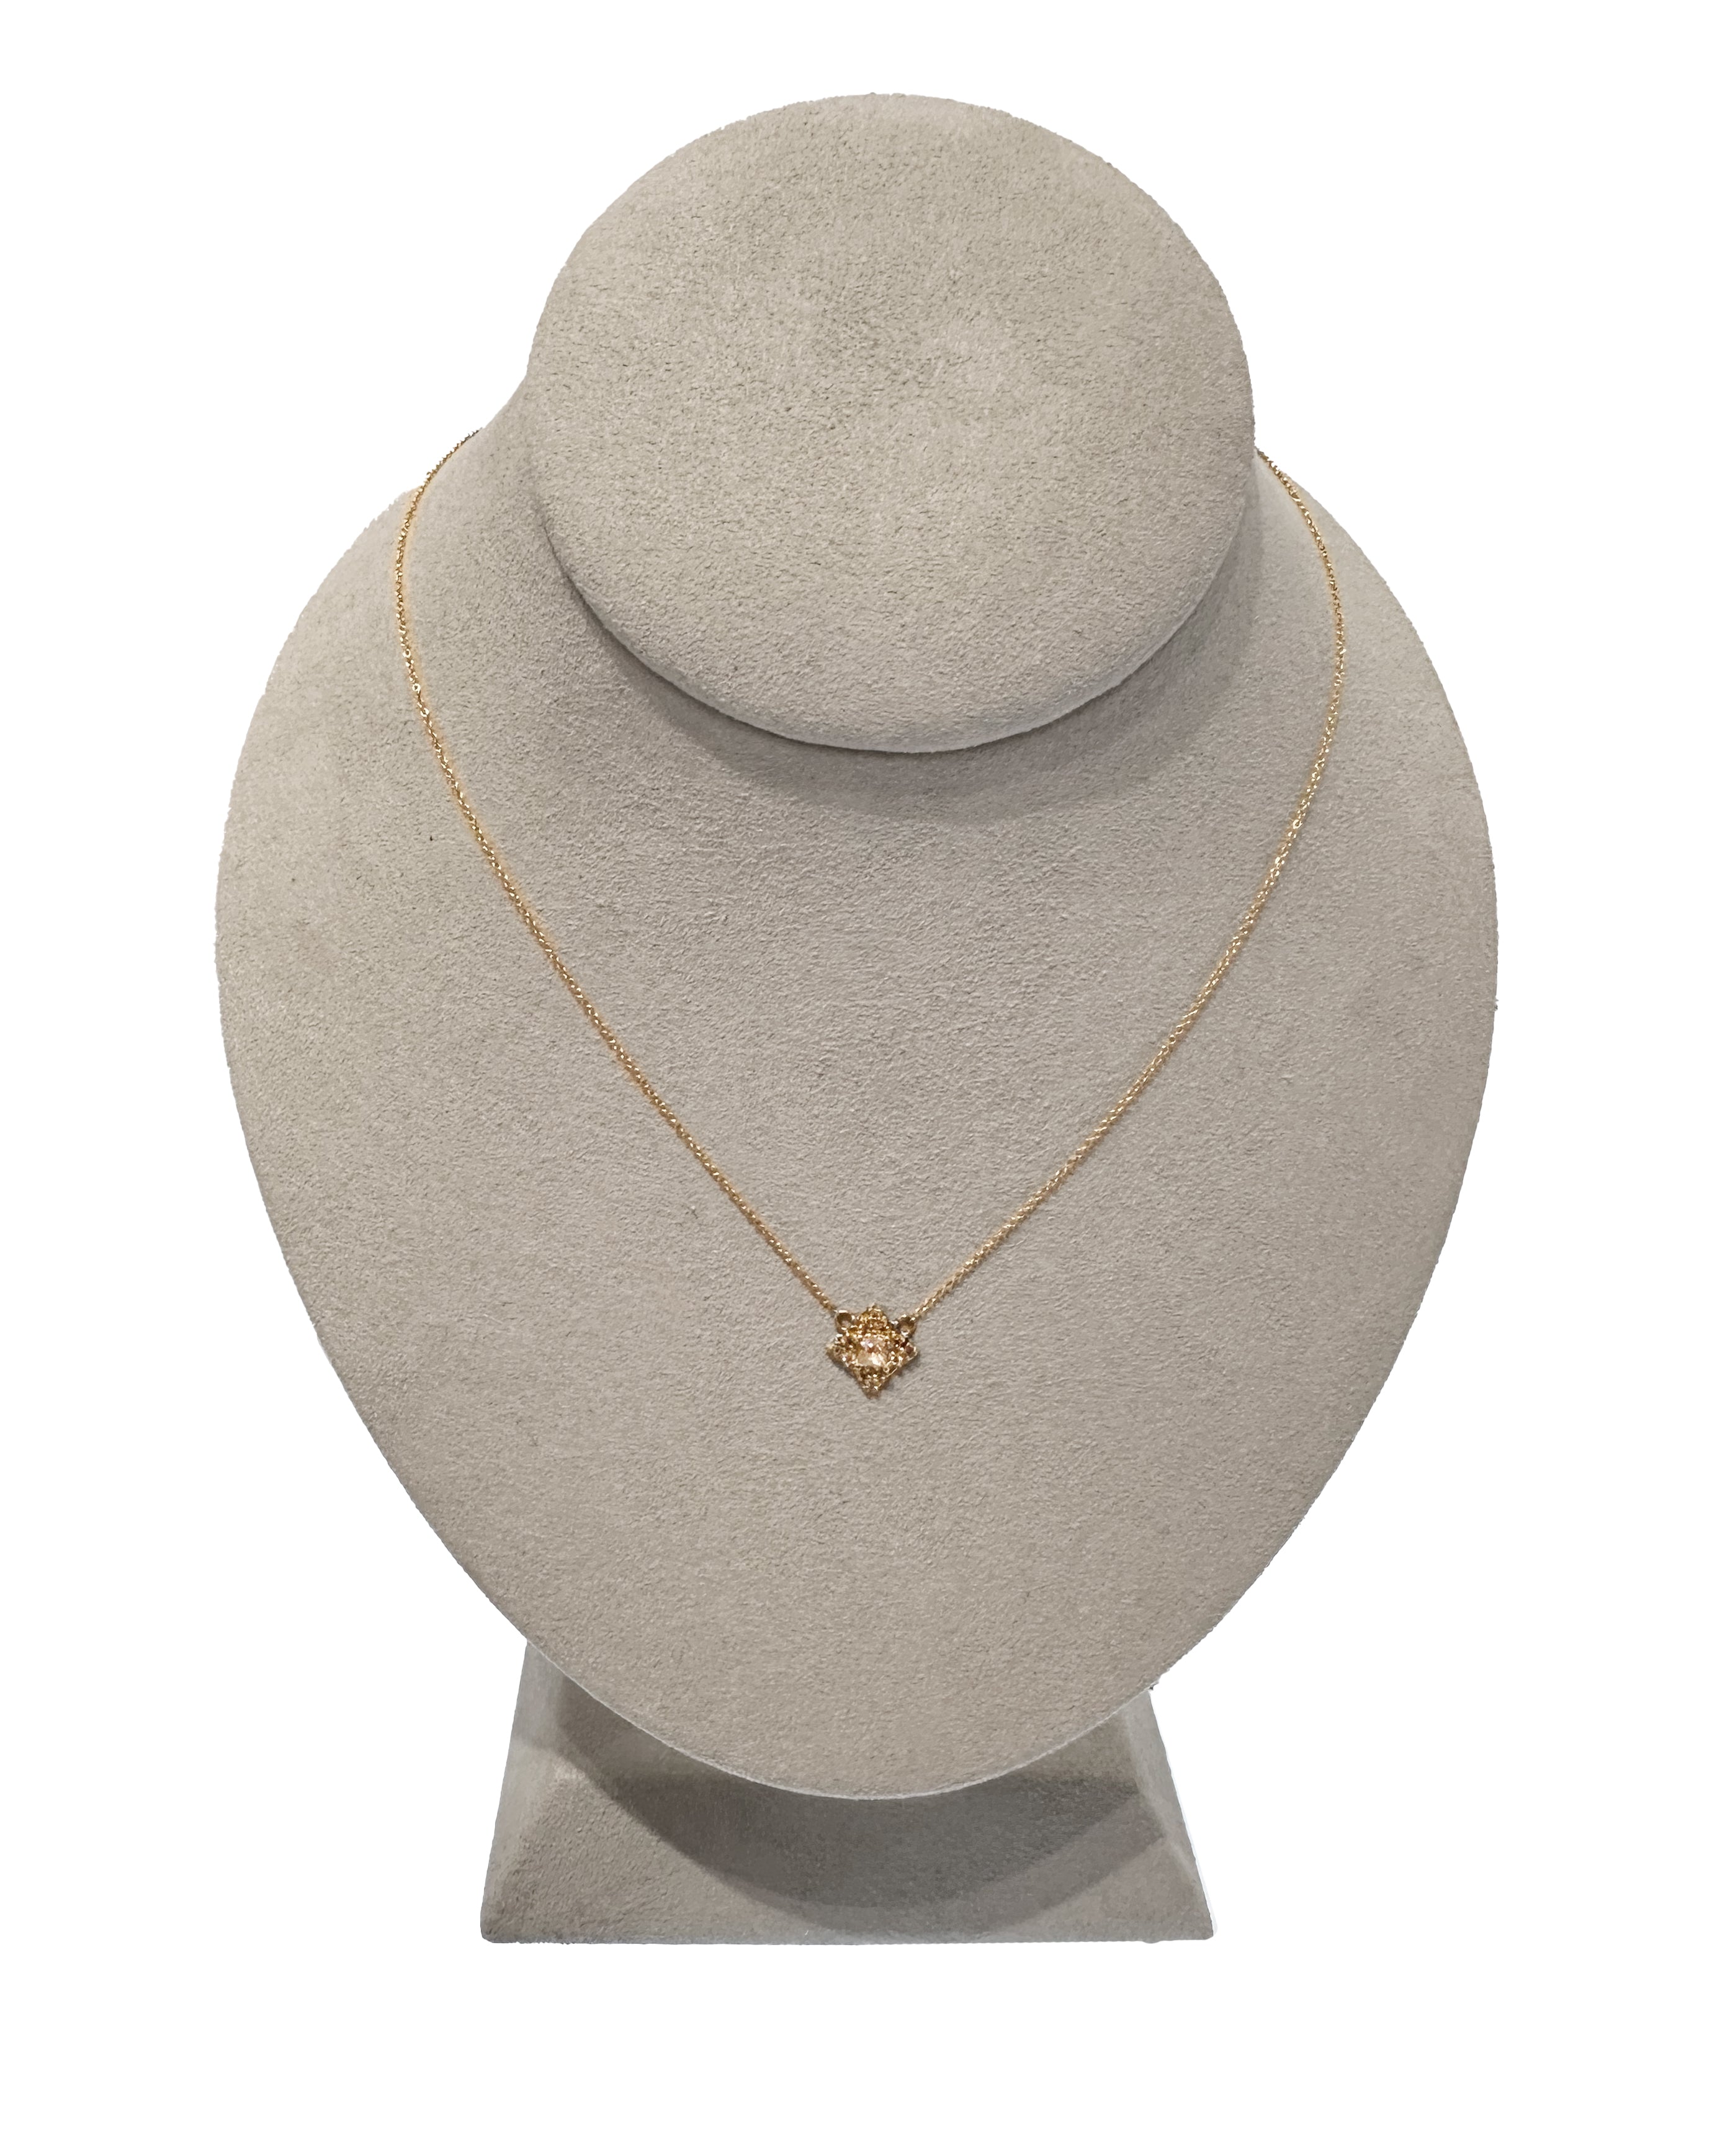 18k Yellow Gold Scallop Charm Necklace